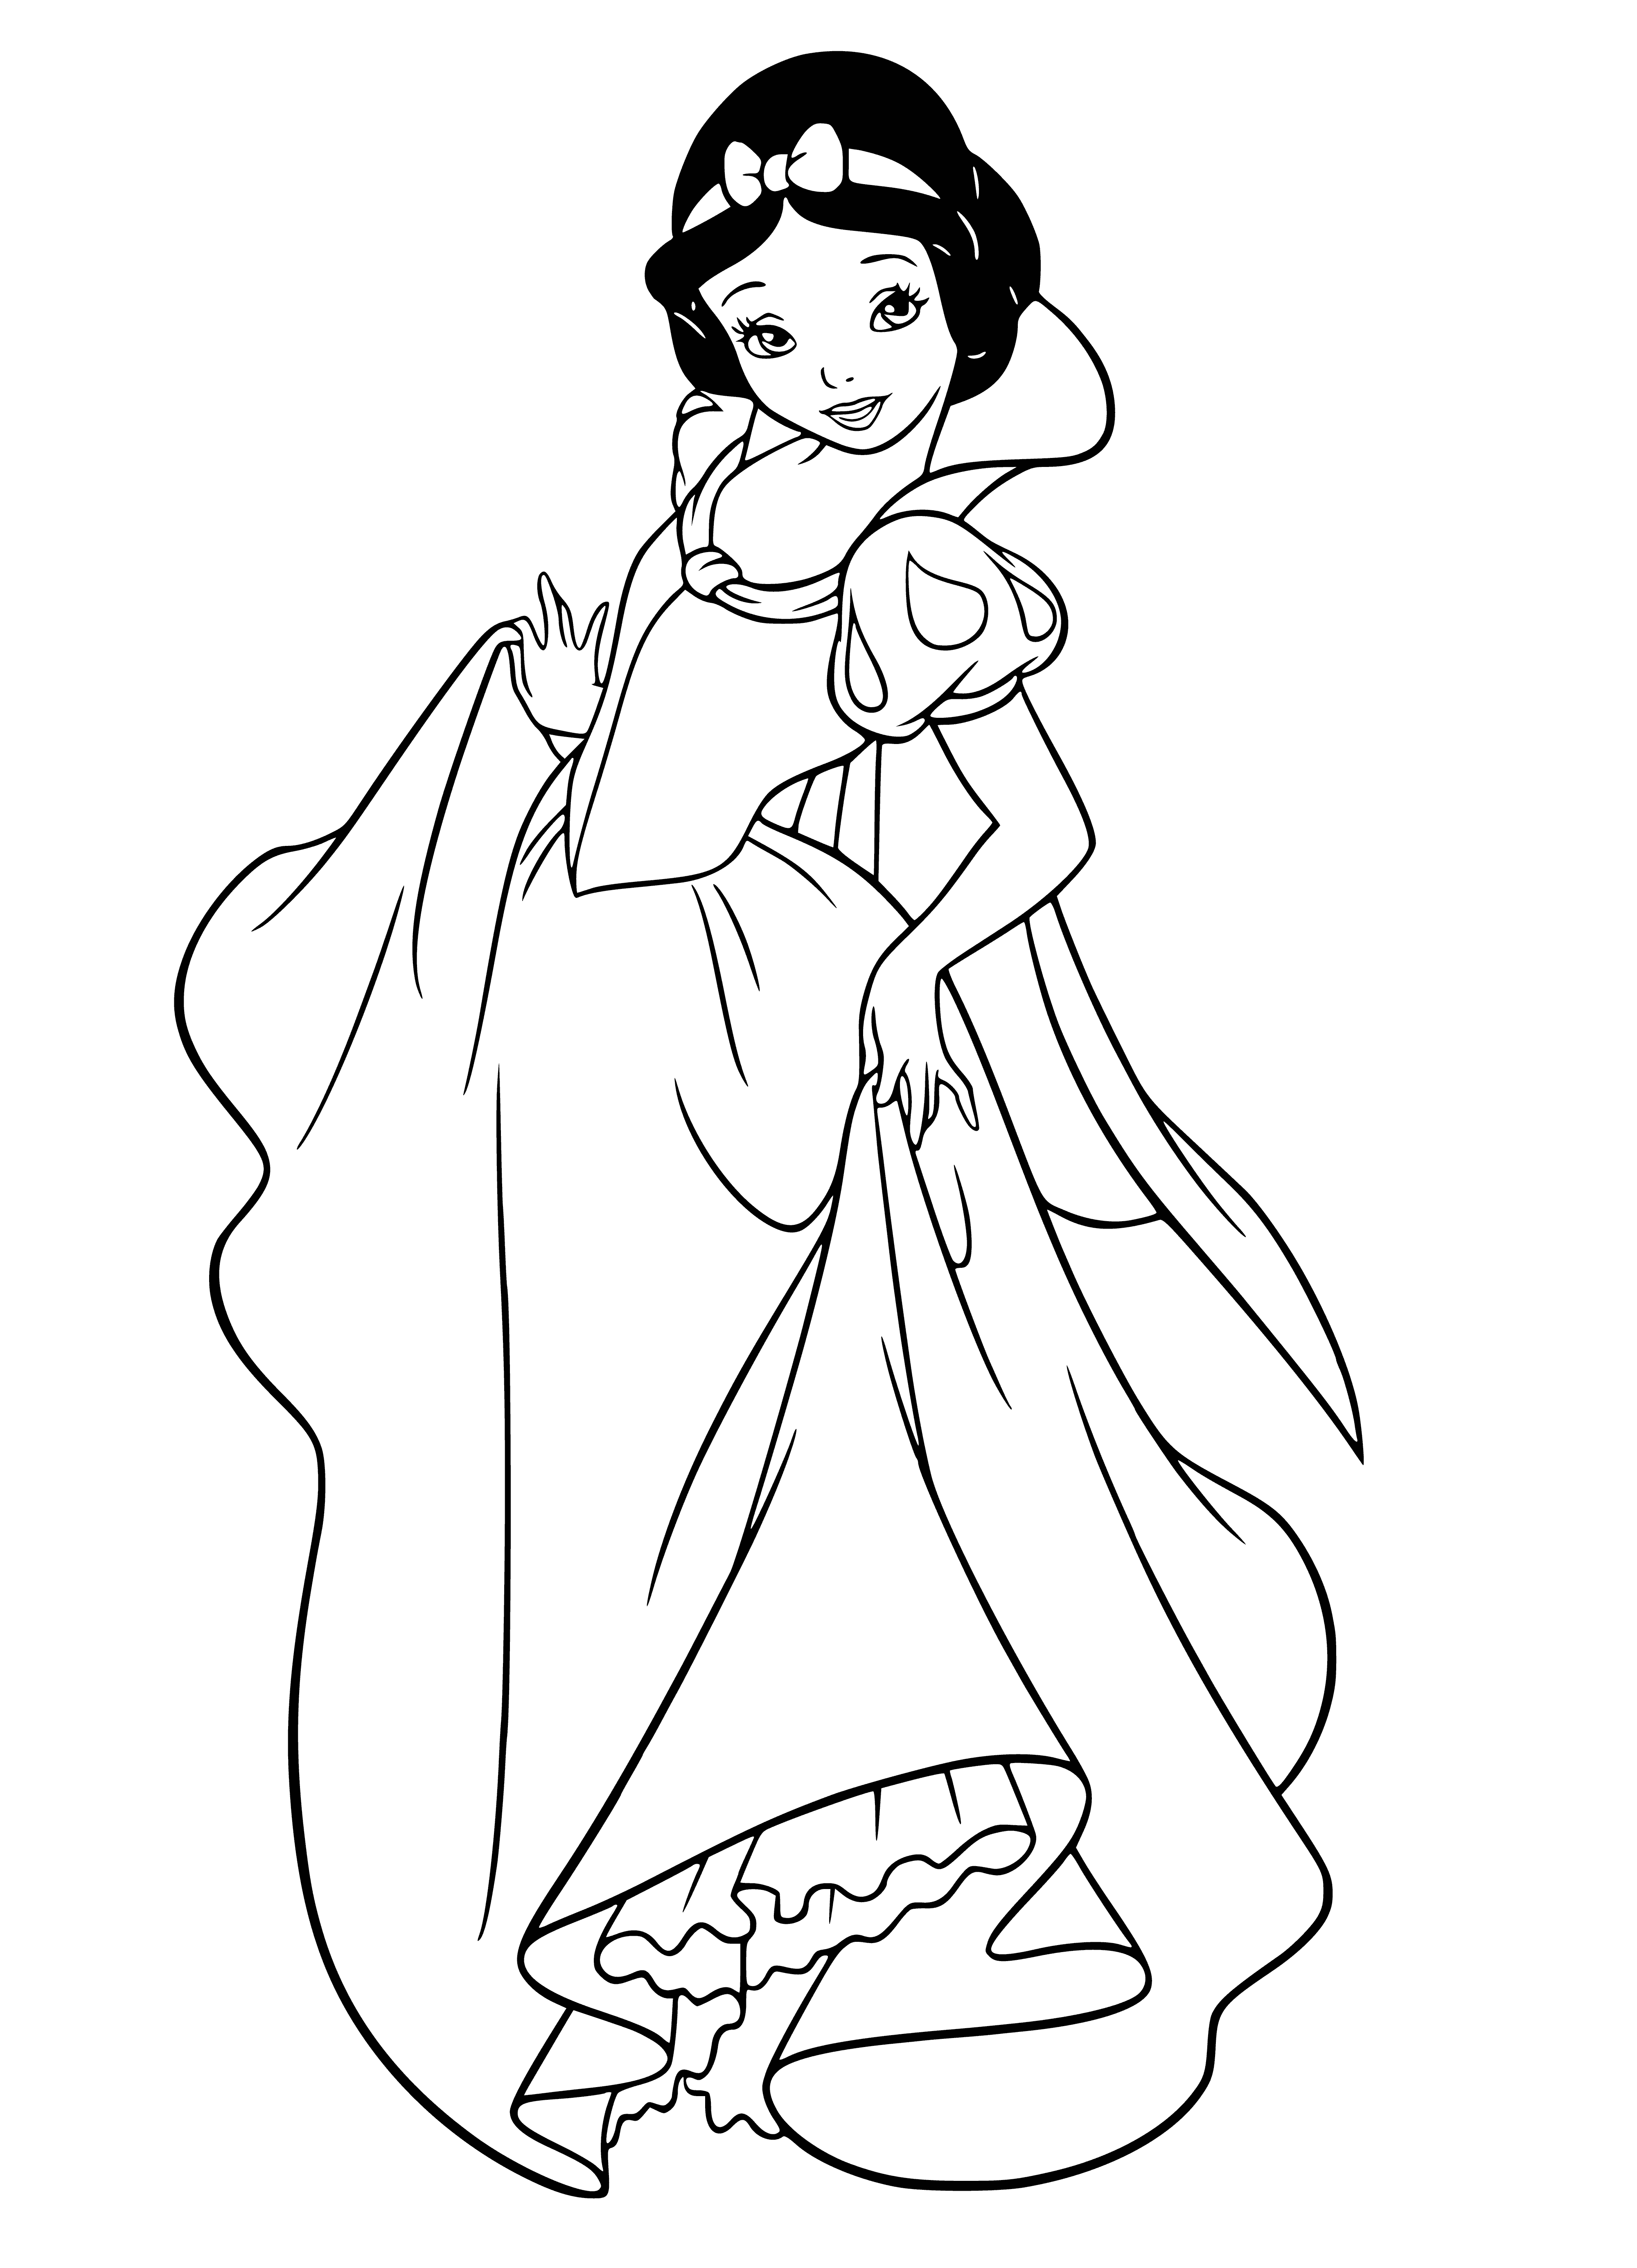 Snow white dancing coloring page